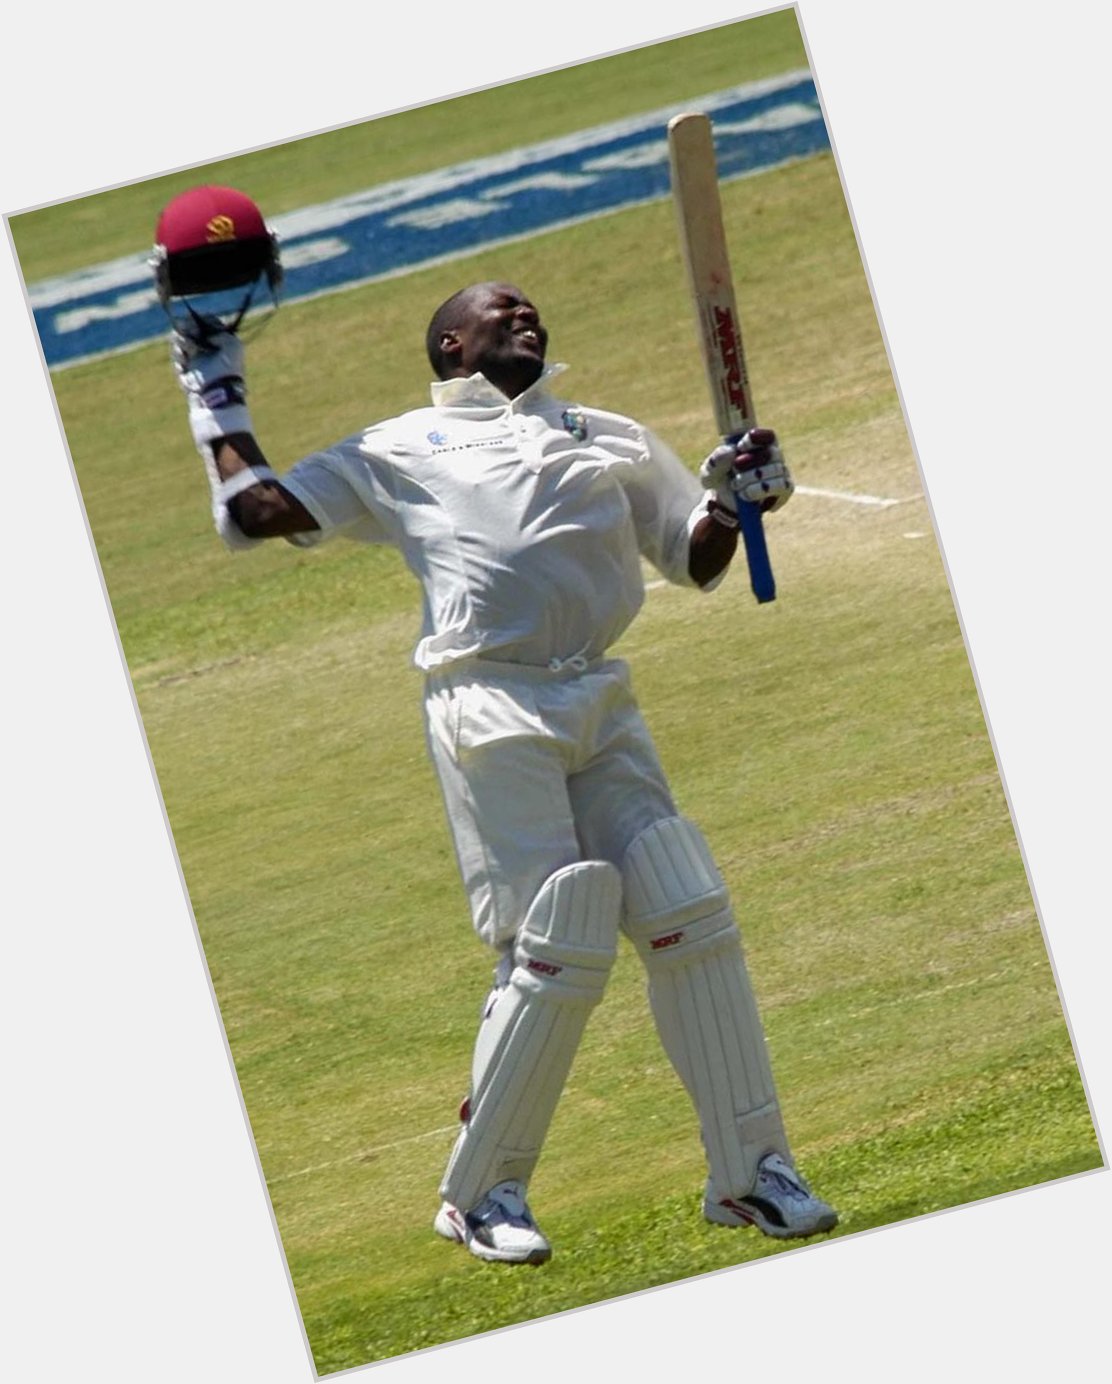 Happy Bday to Brian Lara who still holds records for highest test inns 400* & highest first class inns 501. 